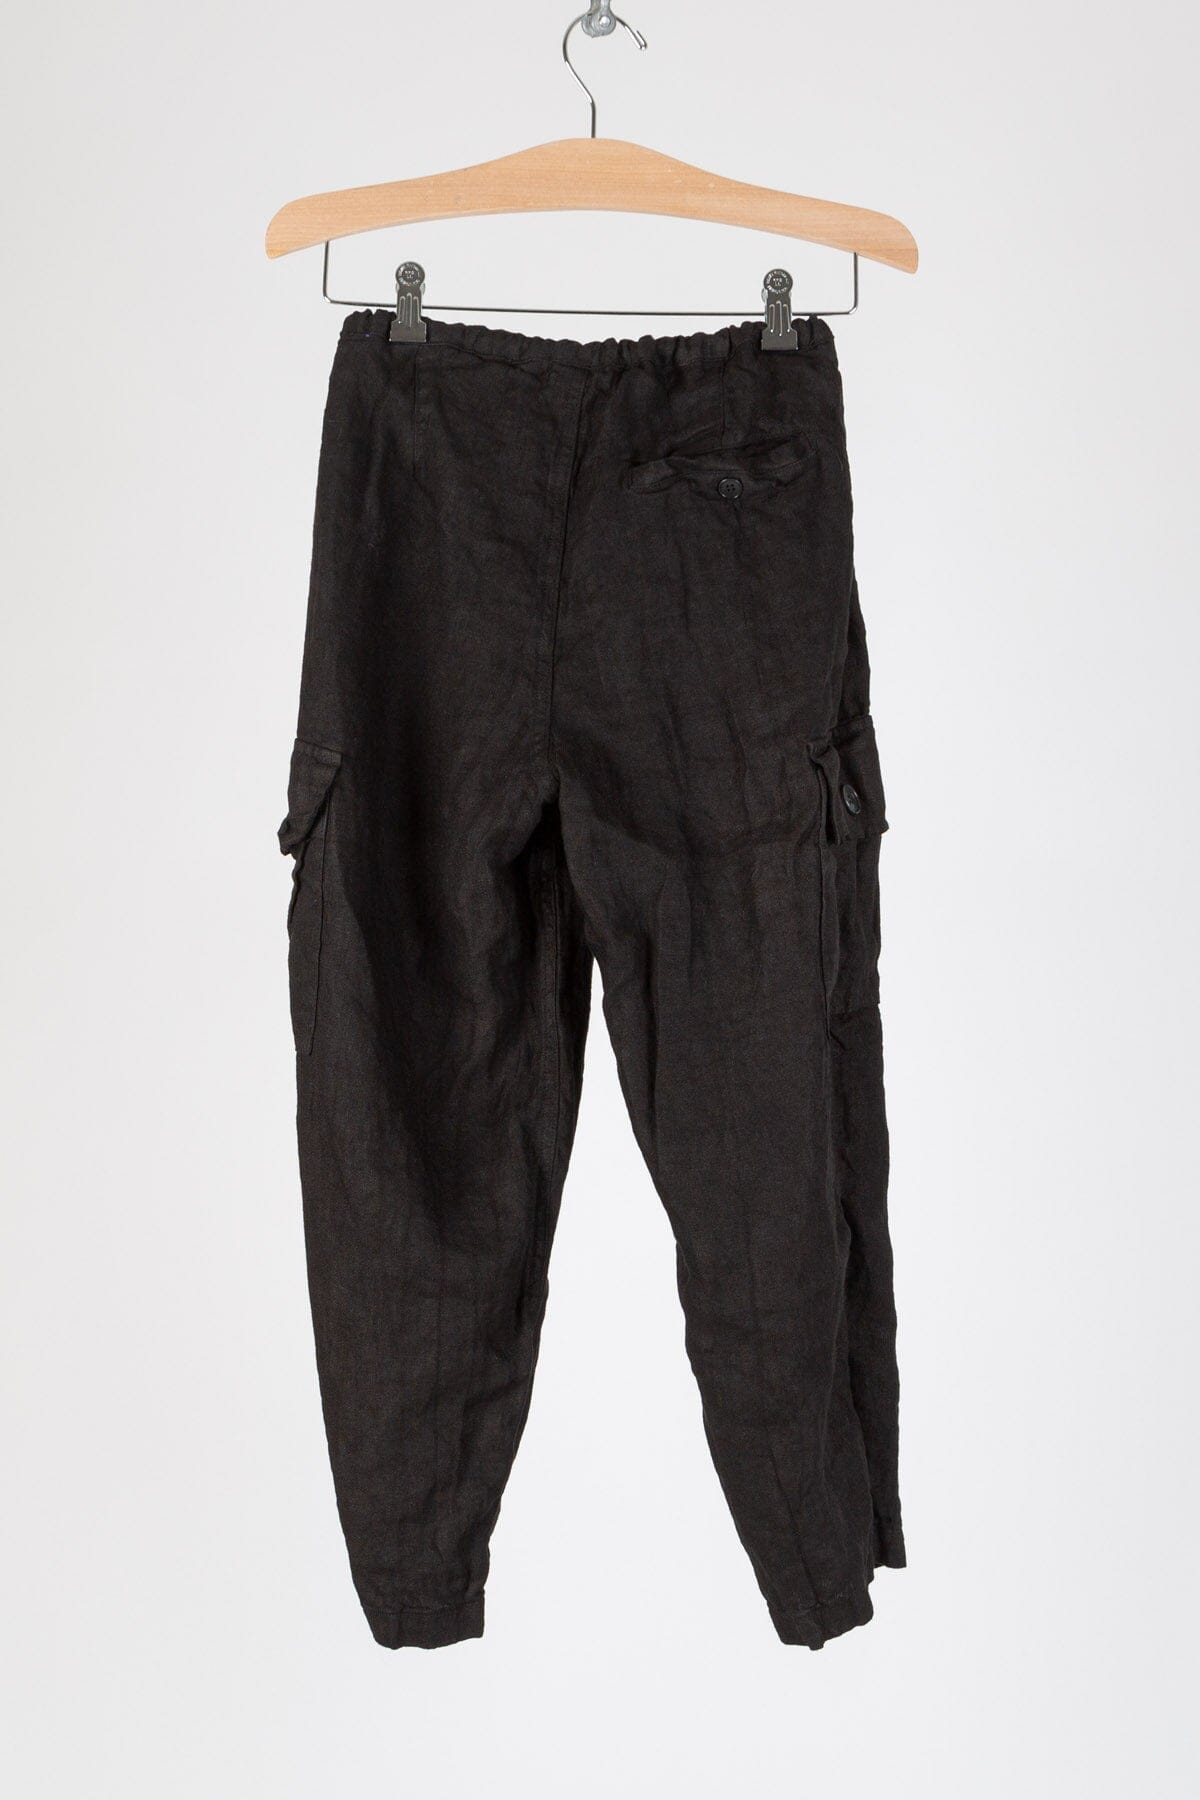 Cropped Cargo - Linen Twill S21 - 893 Bottoms CP Shades black 893